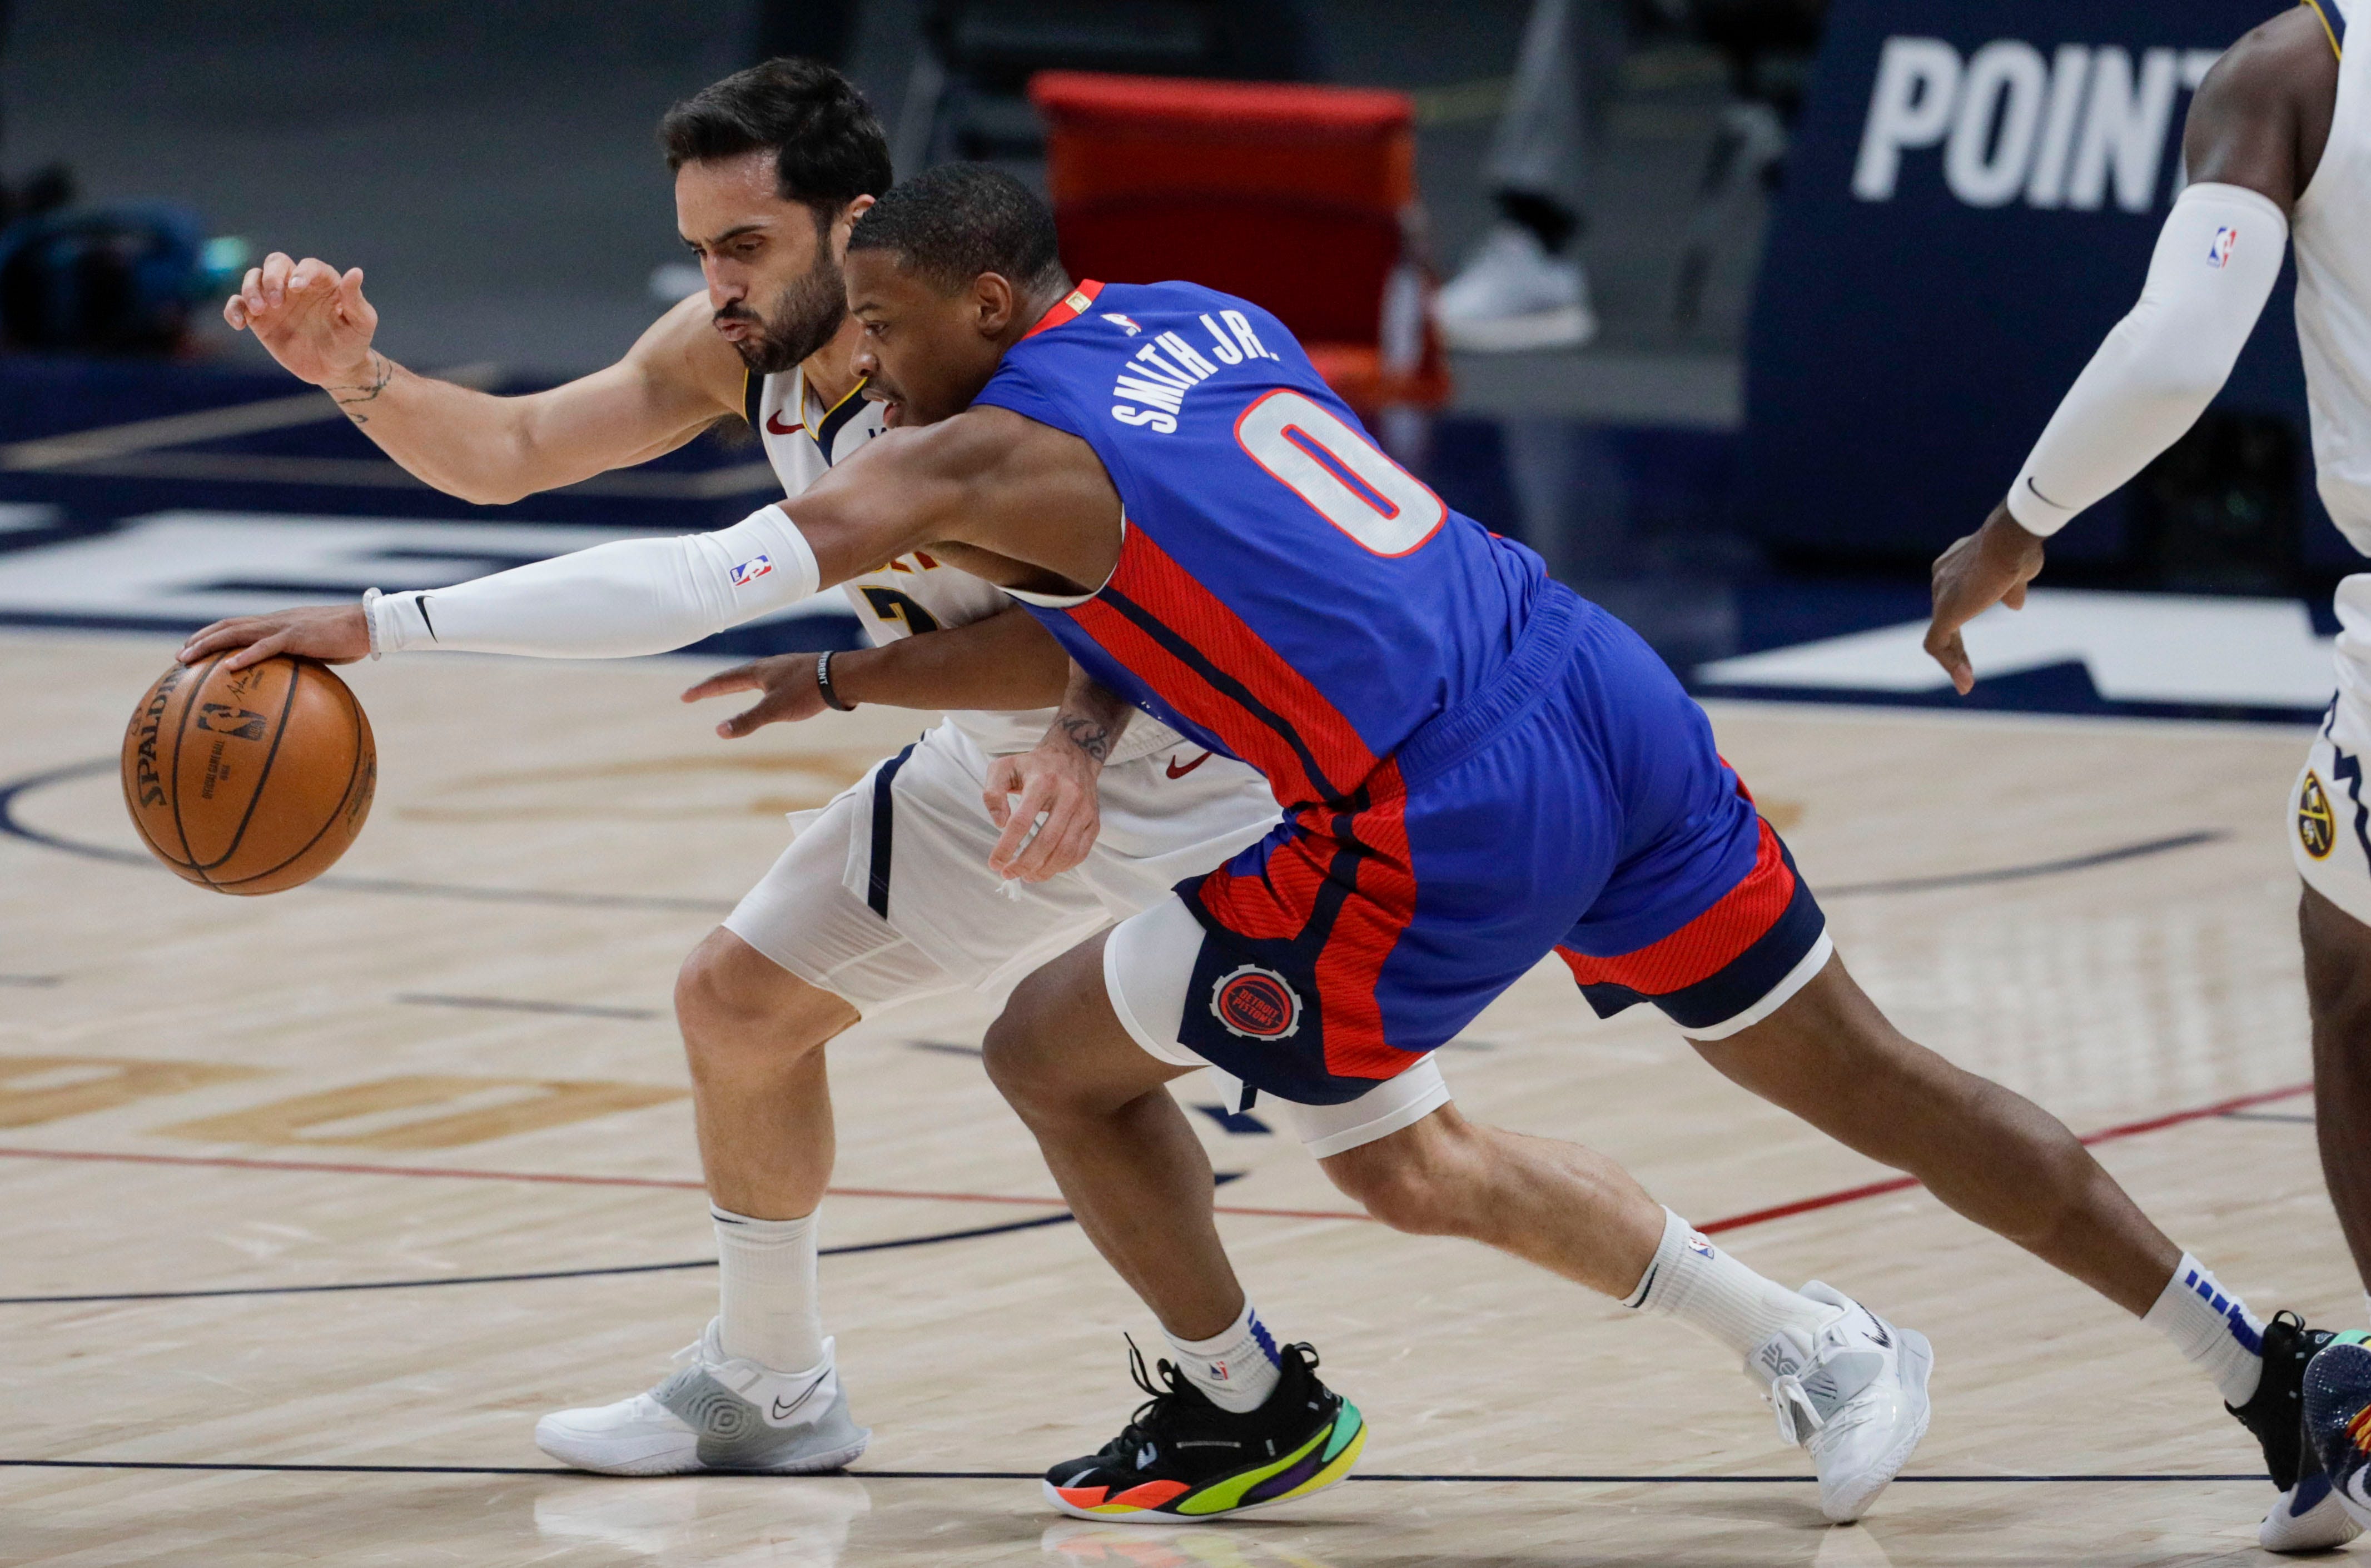 Detroit Pistons guard Dennis Smith Jr. (0) grabs a loose ball against Denver Nuggets guard Facundo Campazzo, right, in the first quarter of an NBA basketball game in Denver, Tuesday, April 6, 2021.